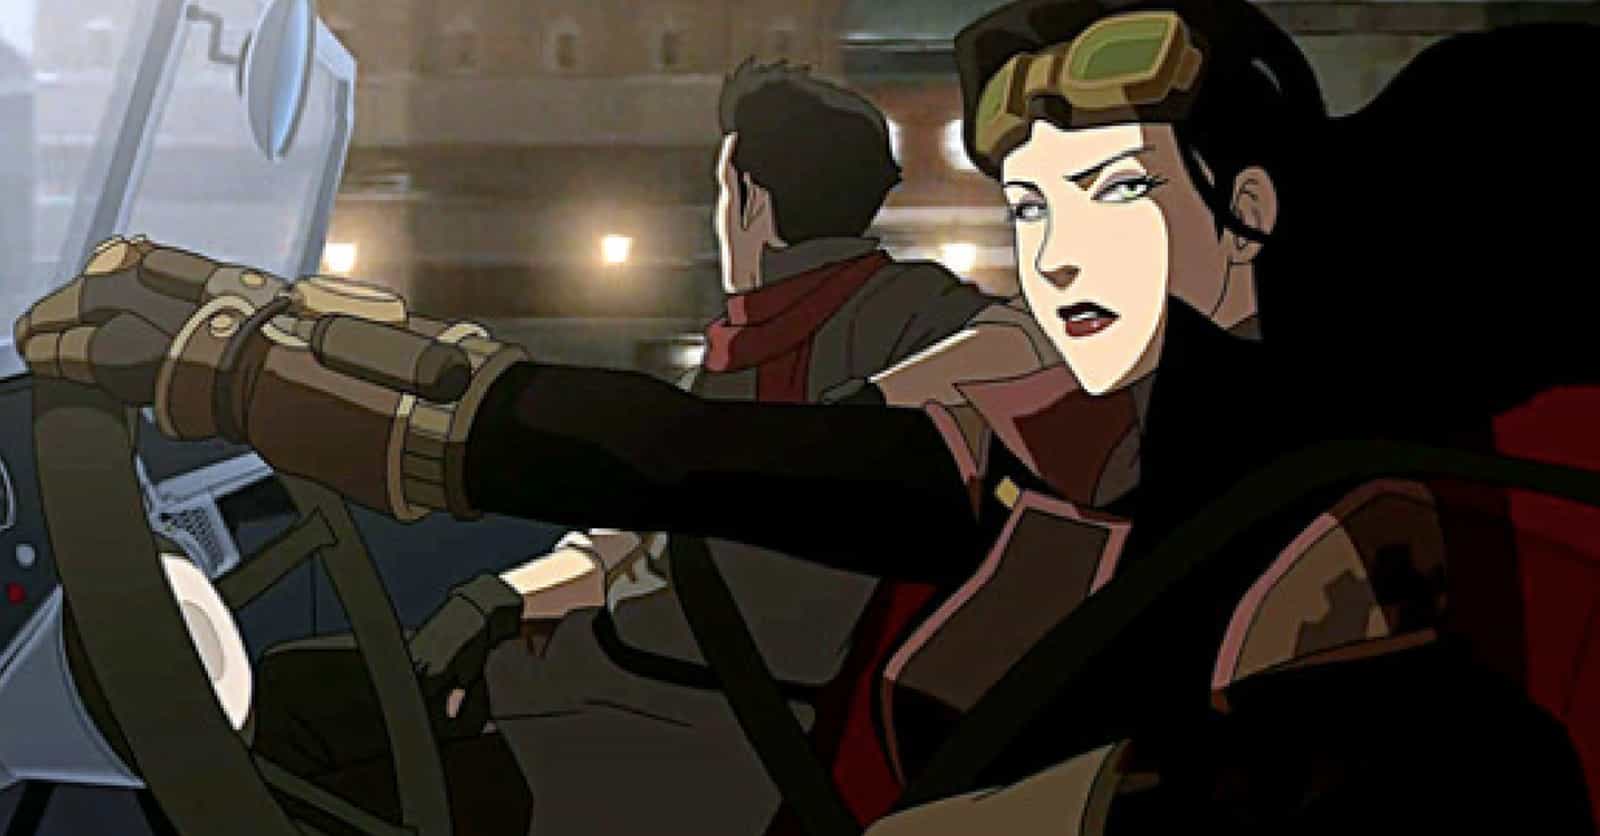 17 Asami Sato Memes That Prove She's The Best Character In 'The Legend of Korra'